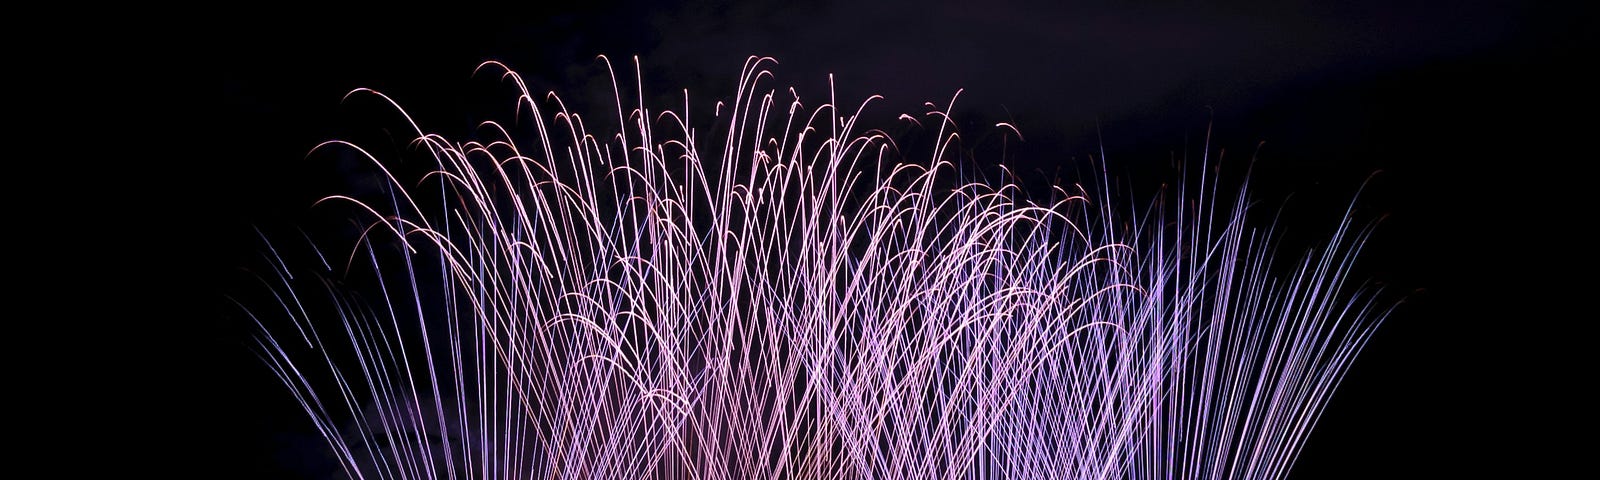 five spouts shooting fireworks into the sky